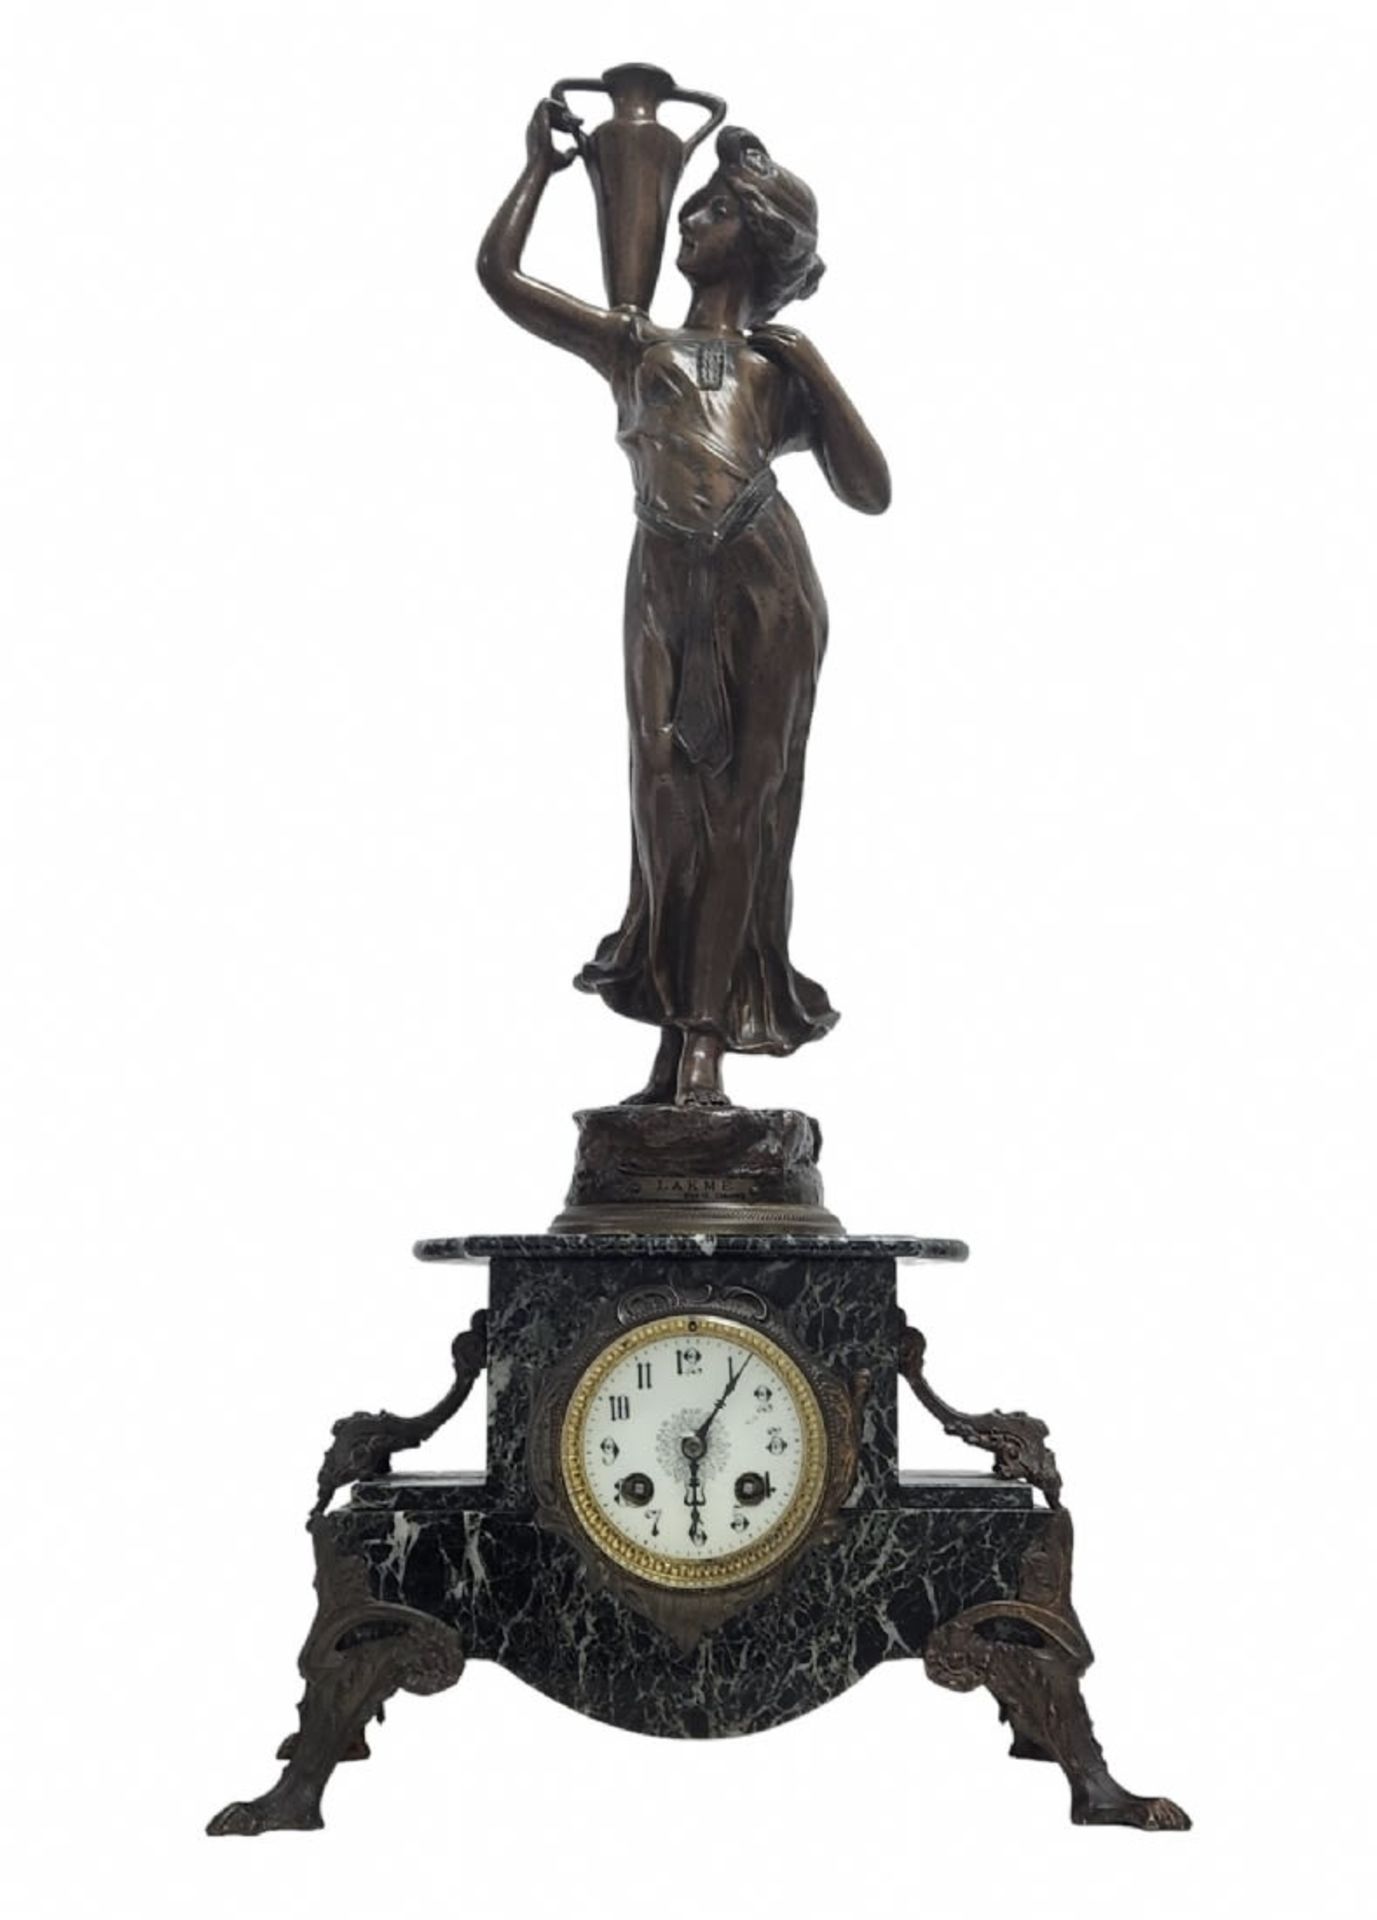 Antique French mantle clock, 19th century, made of mottled Egyptian granite marble and Spelter,